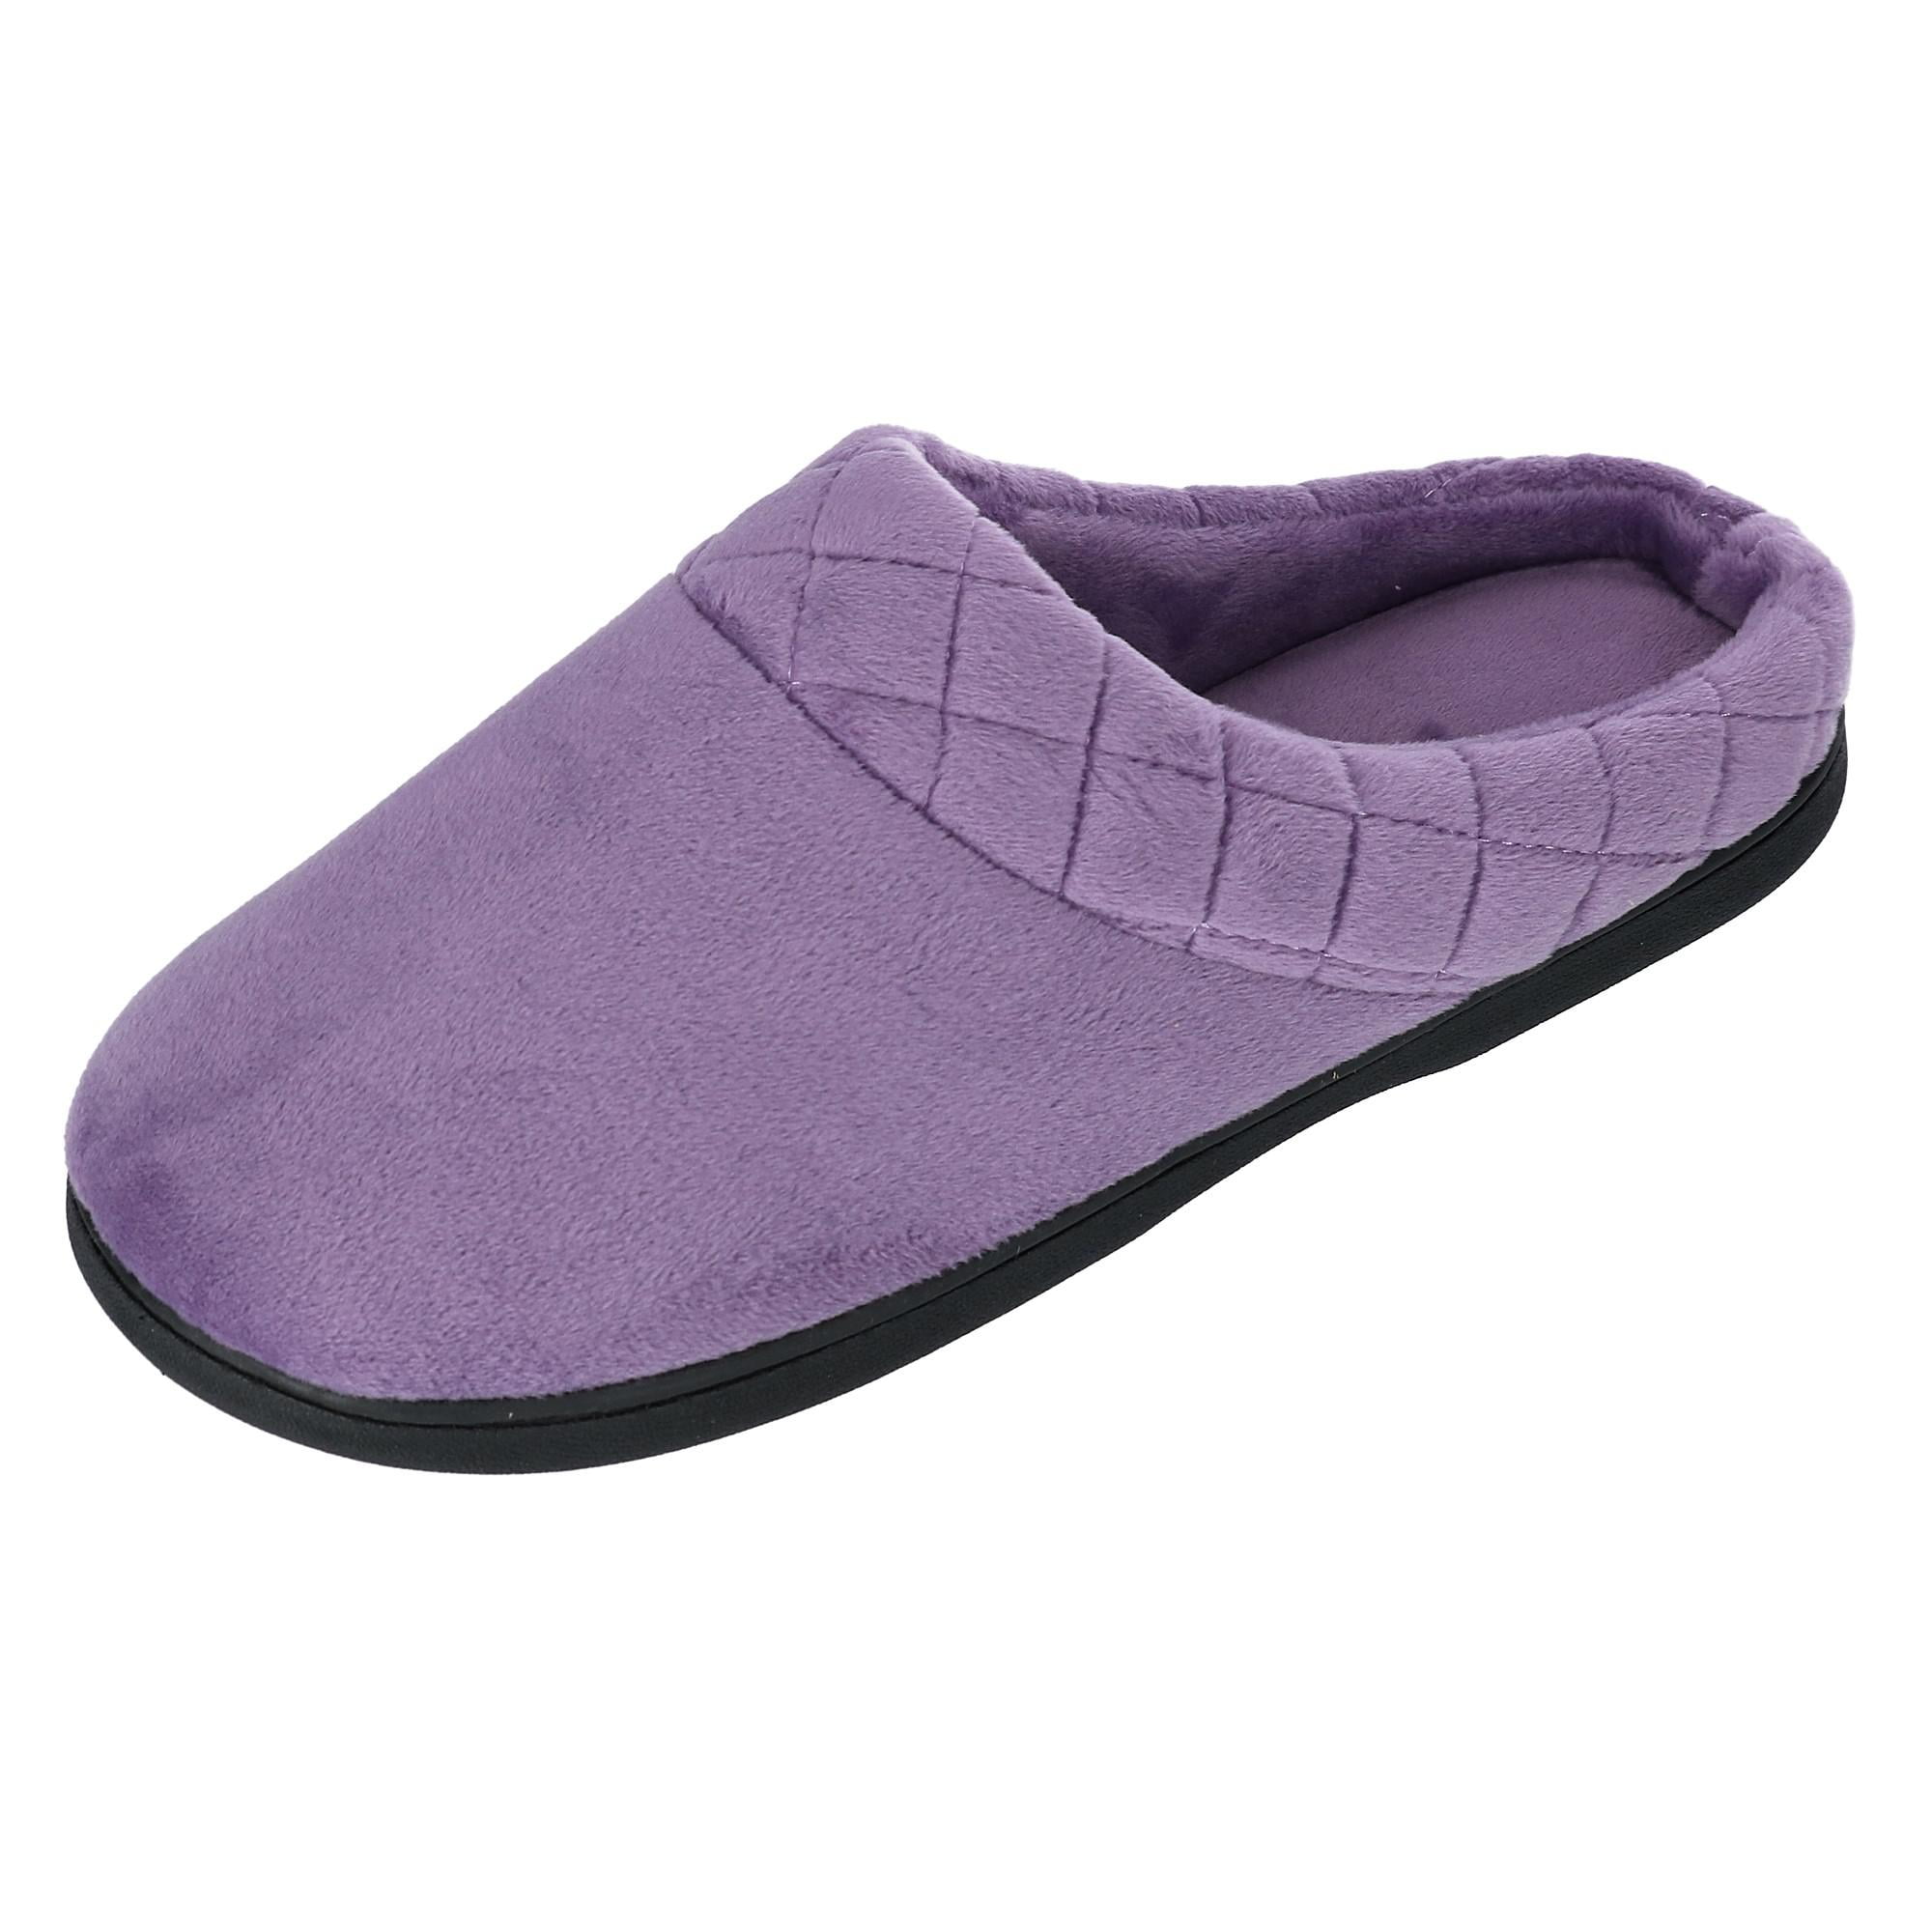 dearfoams women's quilted velour clog slippers